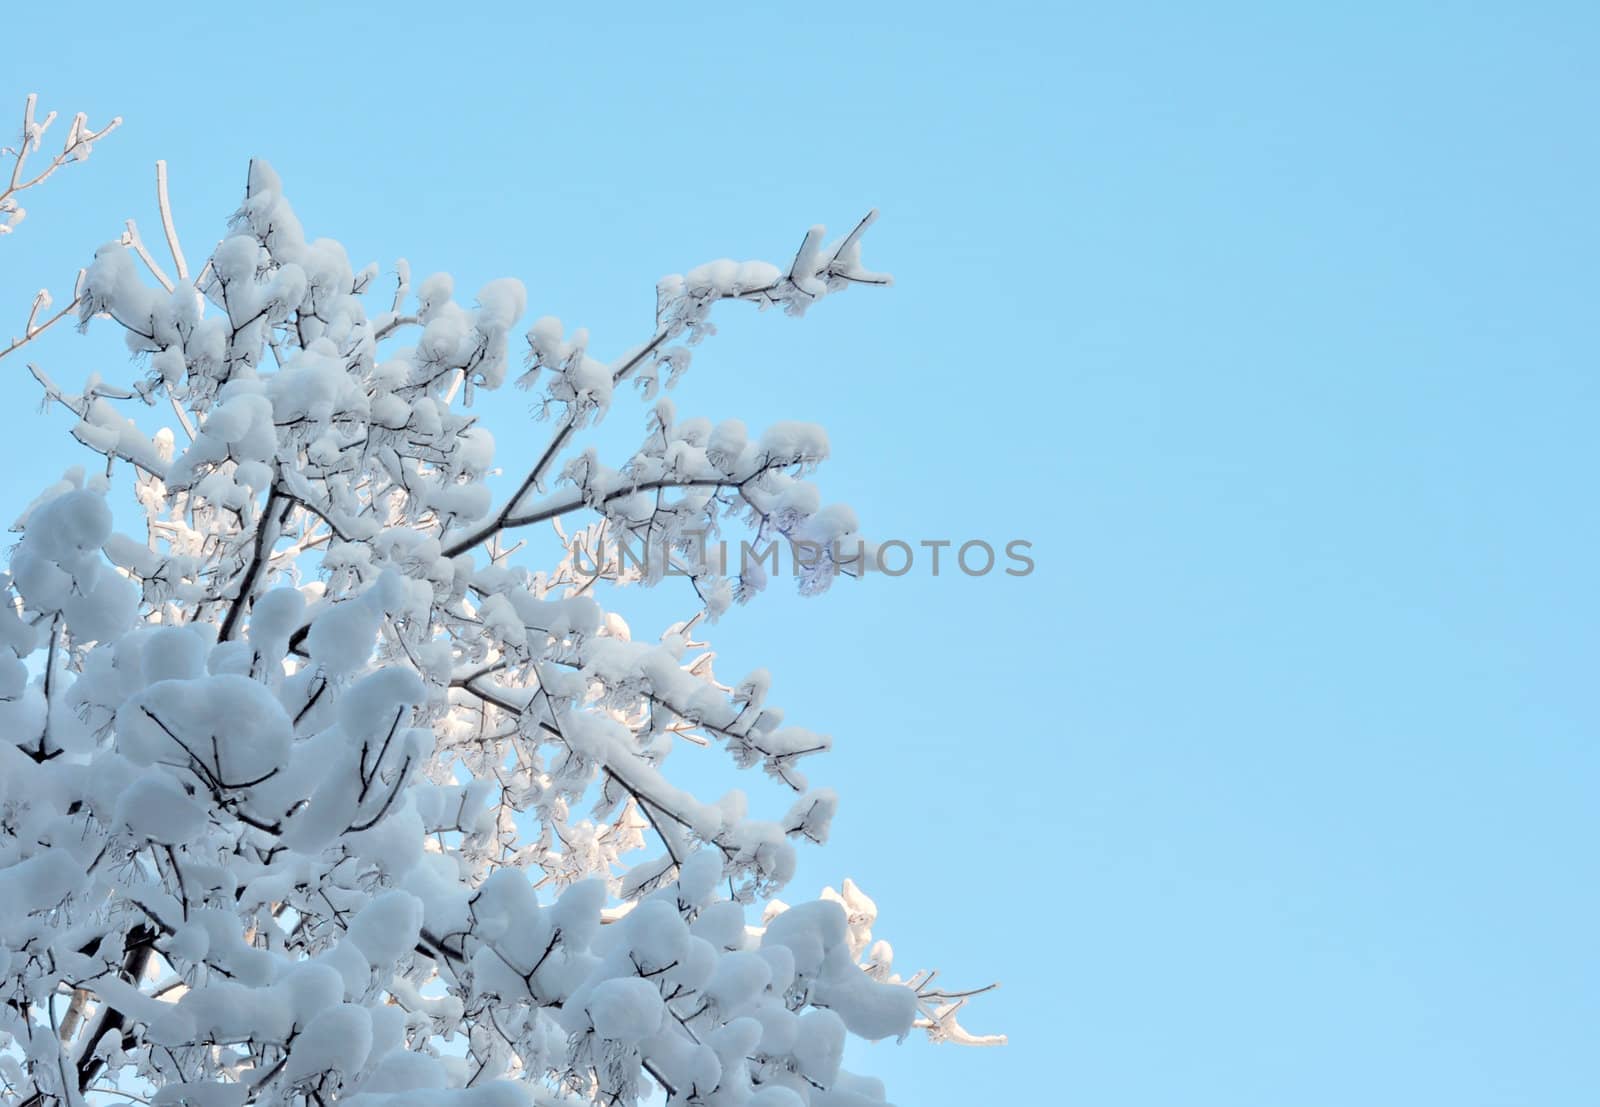 Snow and ice on branches. Russia, Moscow, December